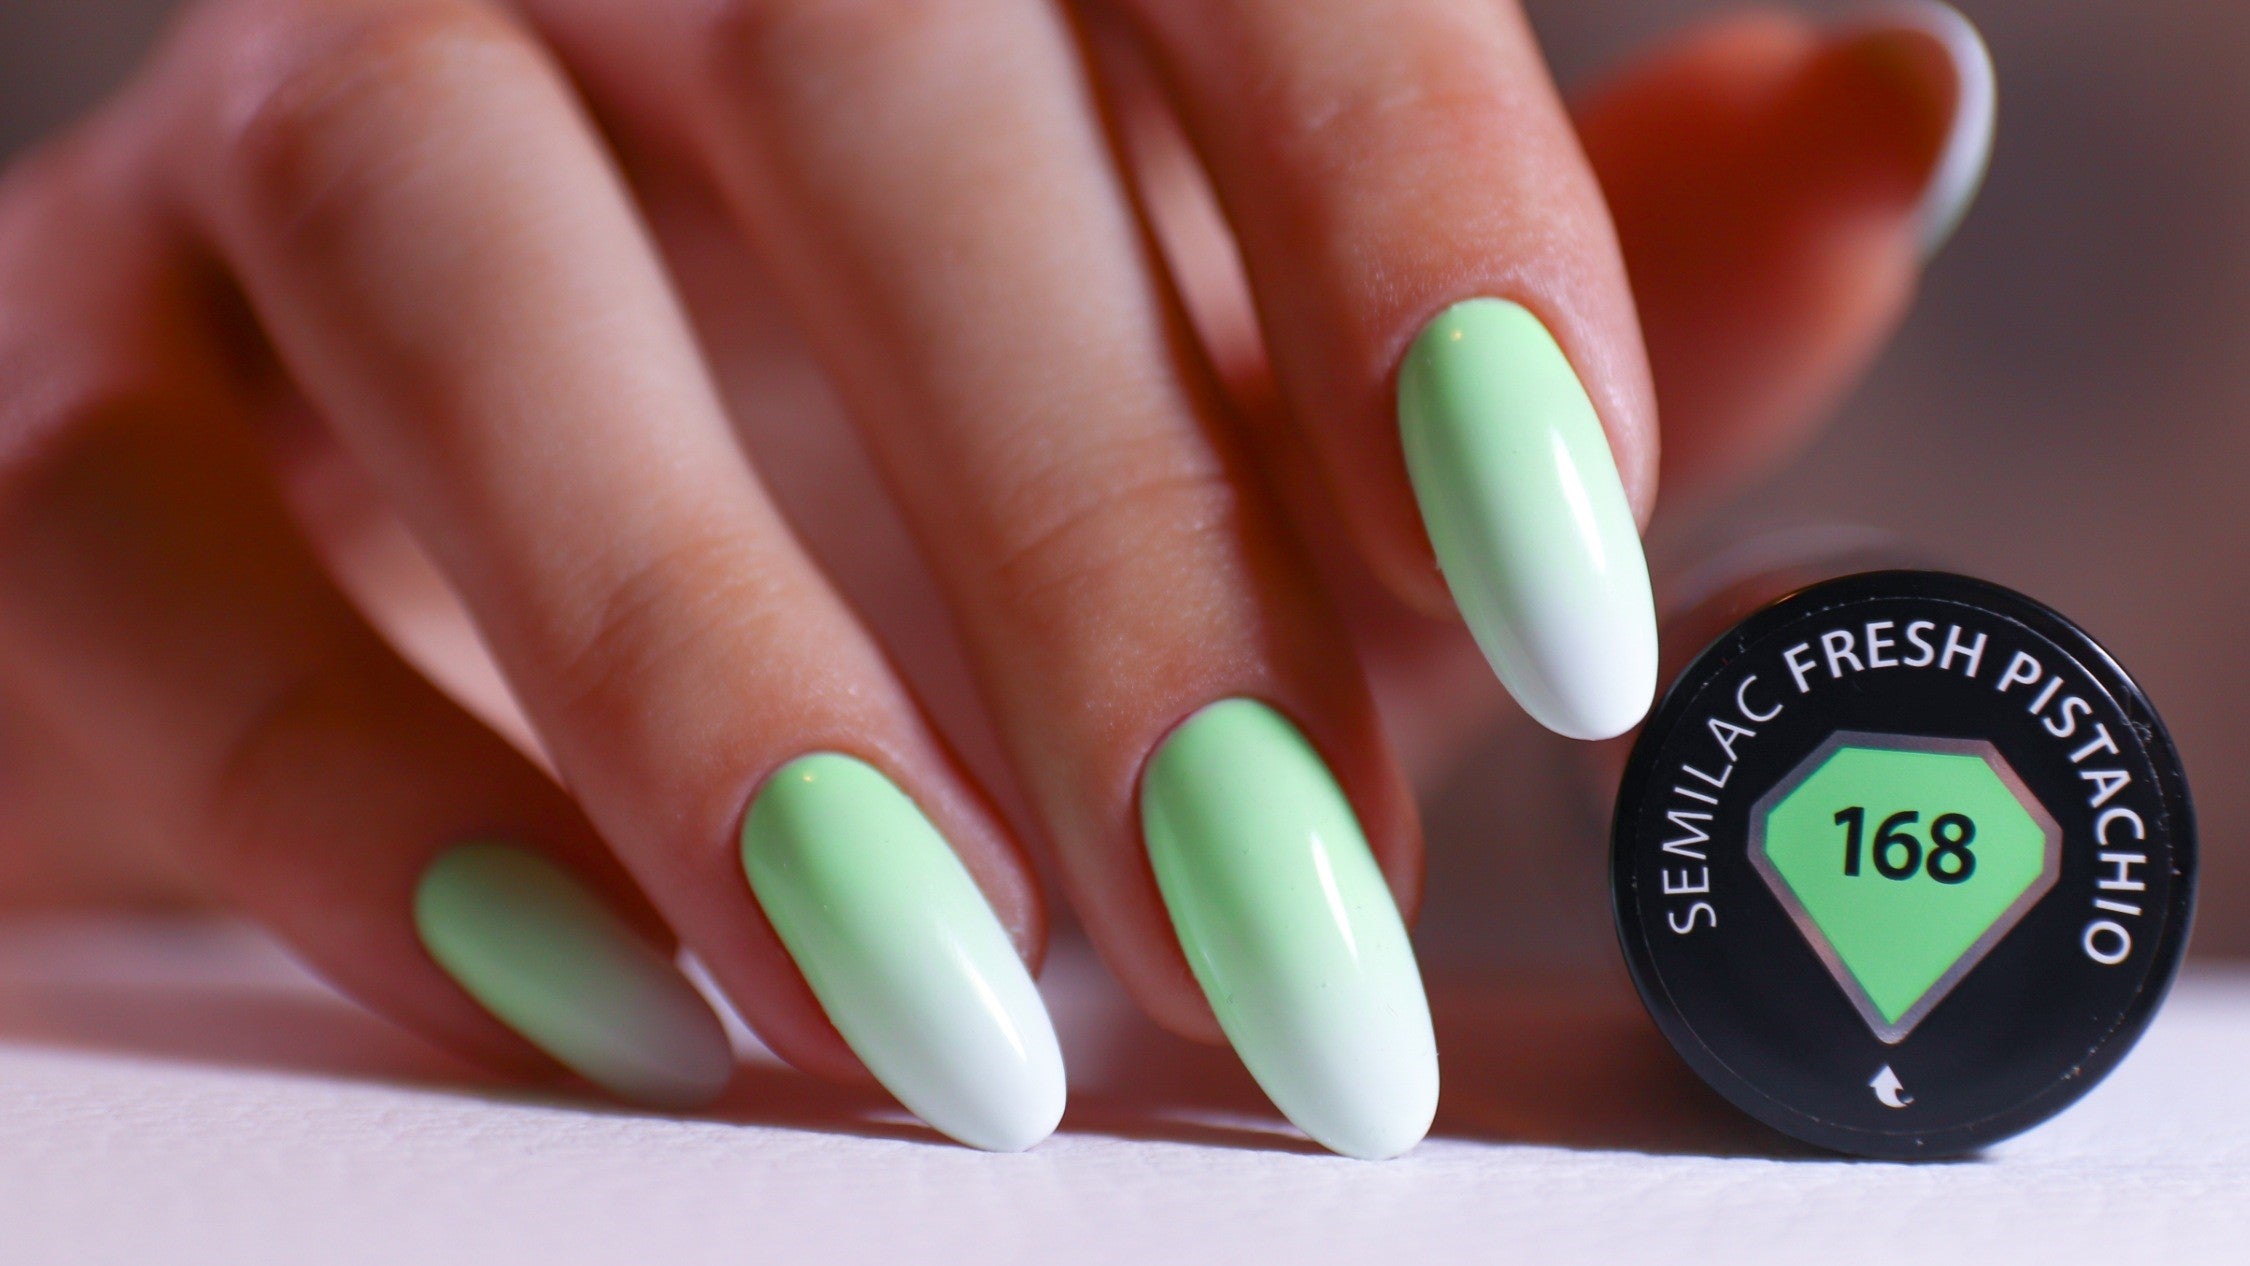 Top 3 Gel Nail Styles for your Complete Summer